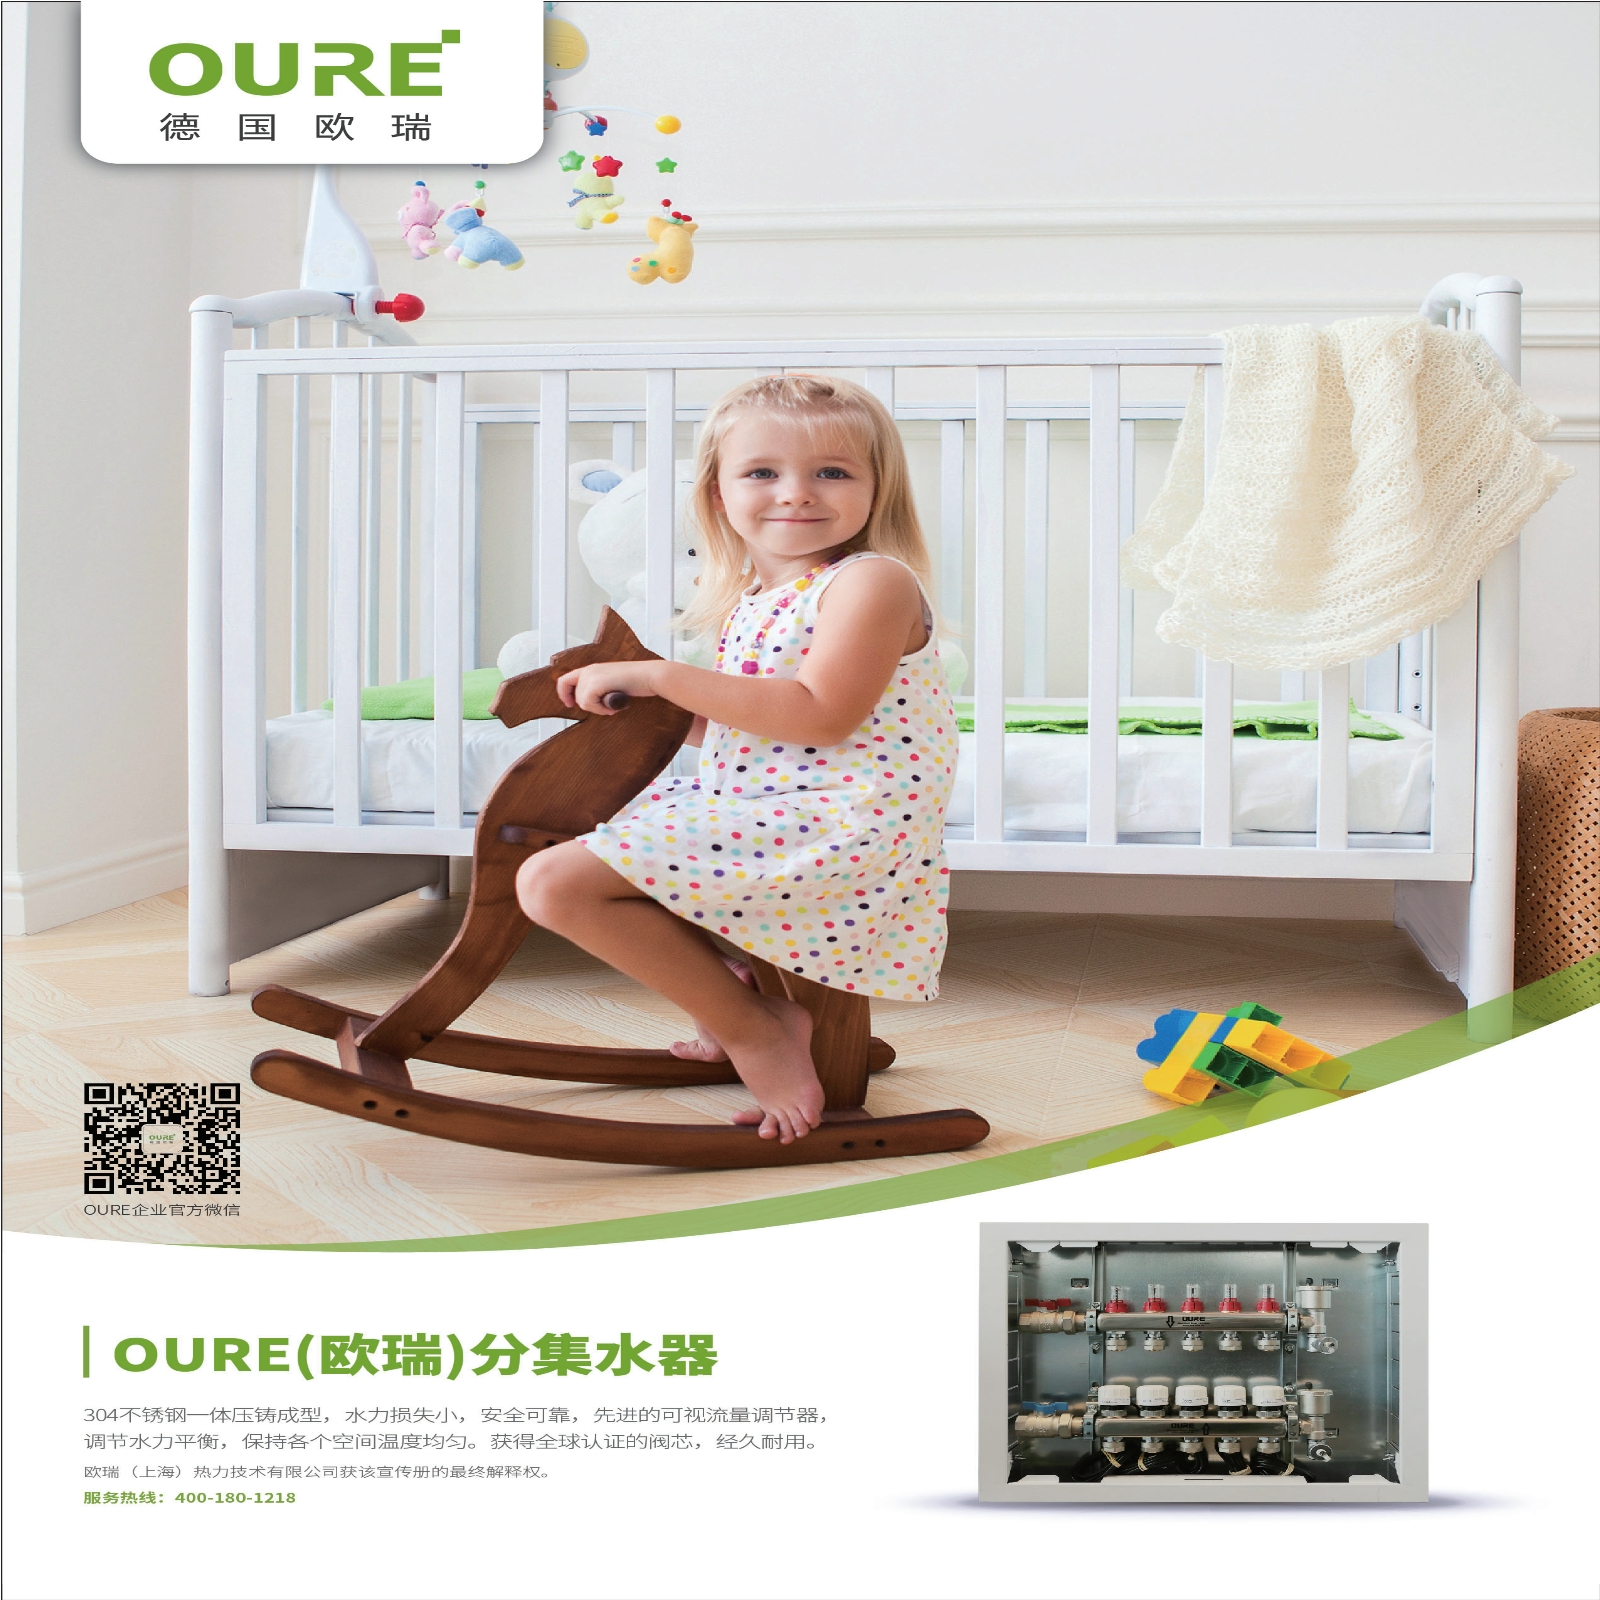 oure(欧瑞）分集水器